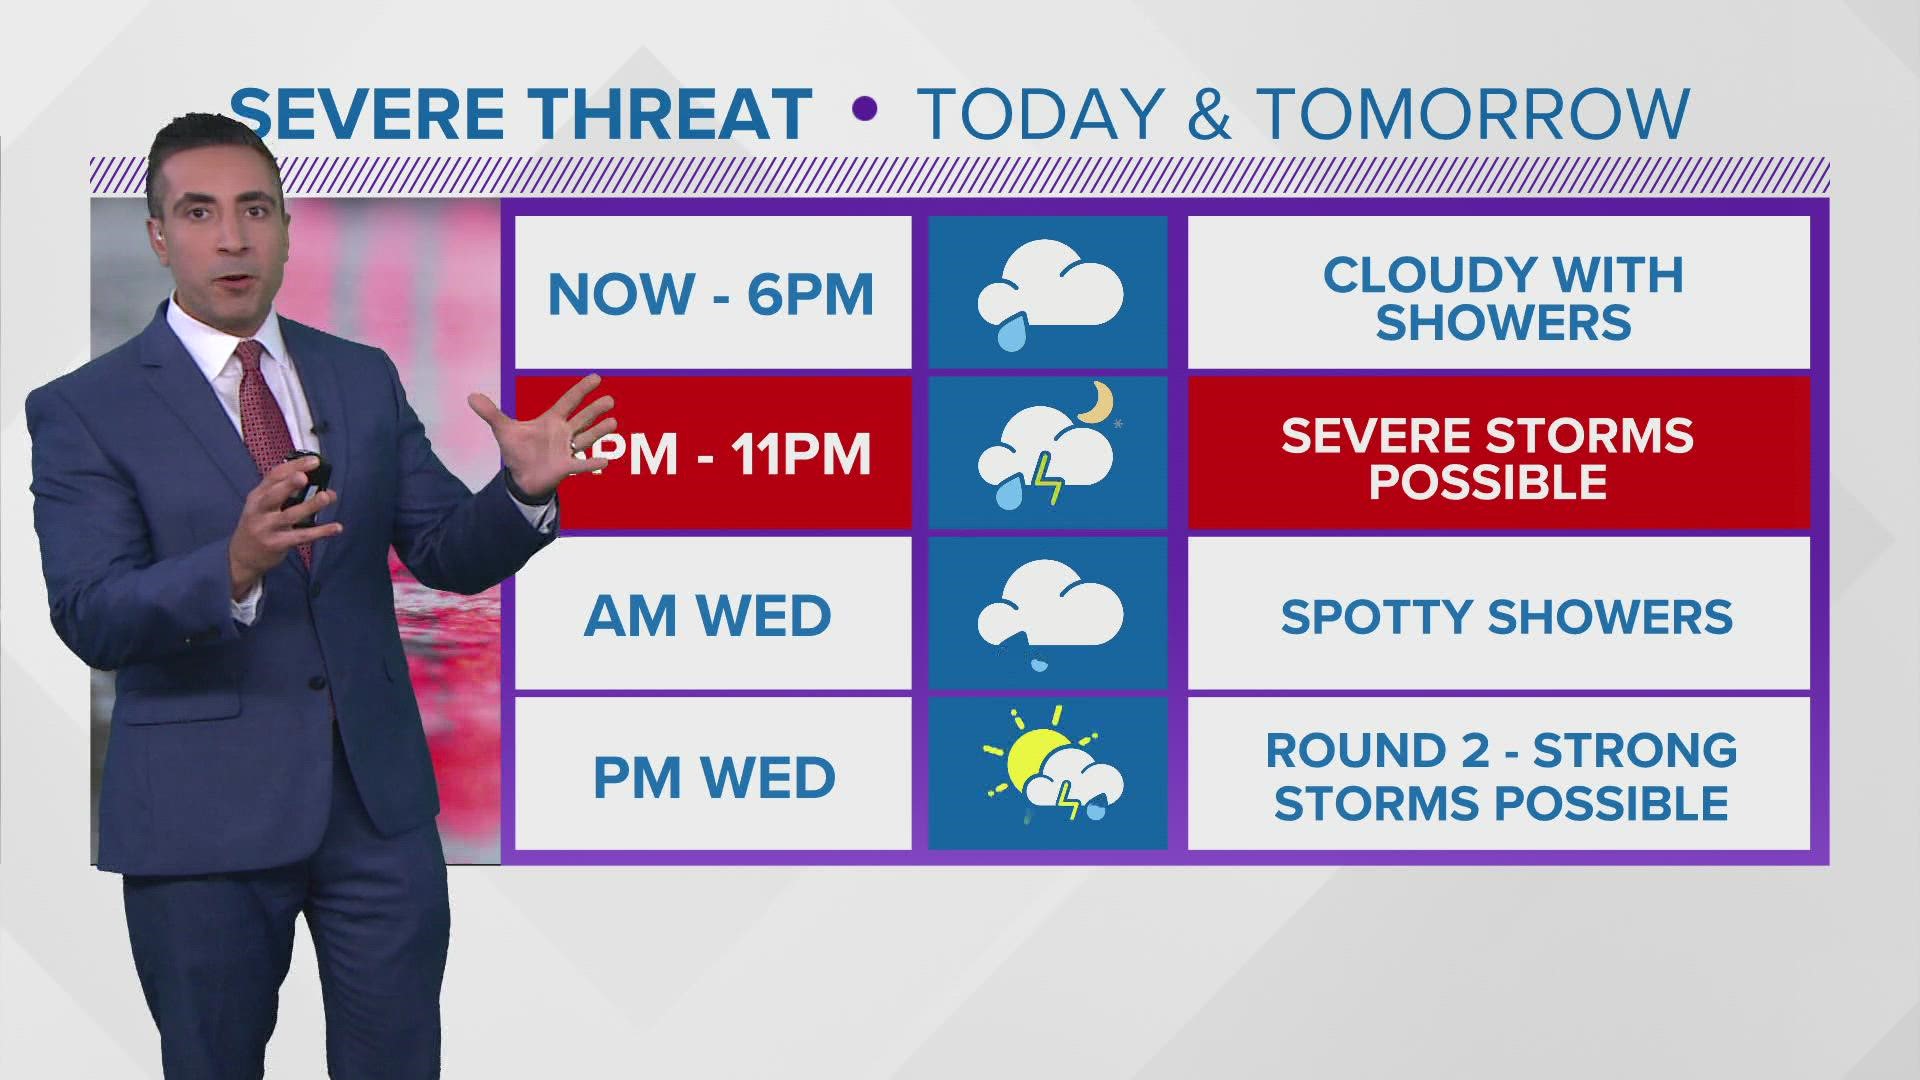 Thunderstorms rolled into the Houston area late this afternoon, but cloud cover that kept our temperatures down today also lowered our threat for severe storms.